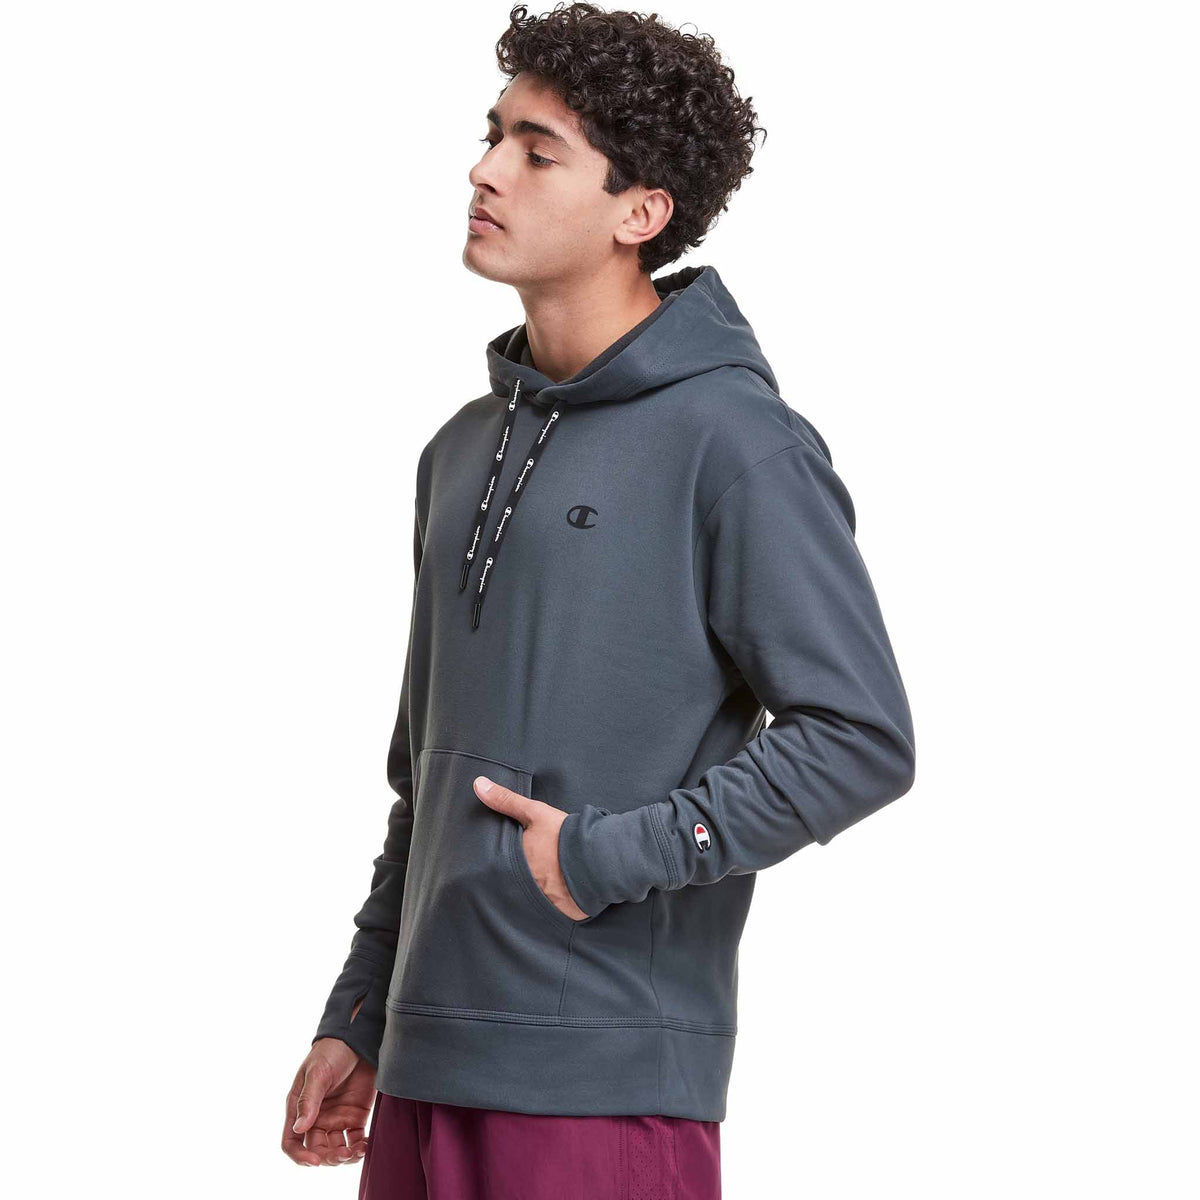 Champion Game Day Hoodie sweatshirt sport à capuchon pour homme - Stealth - angle